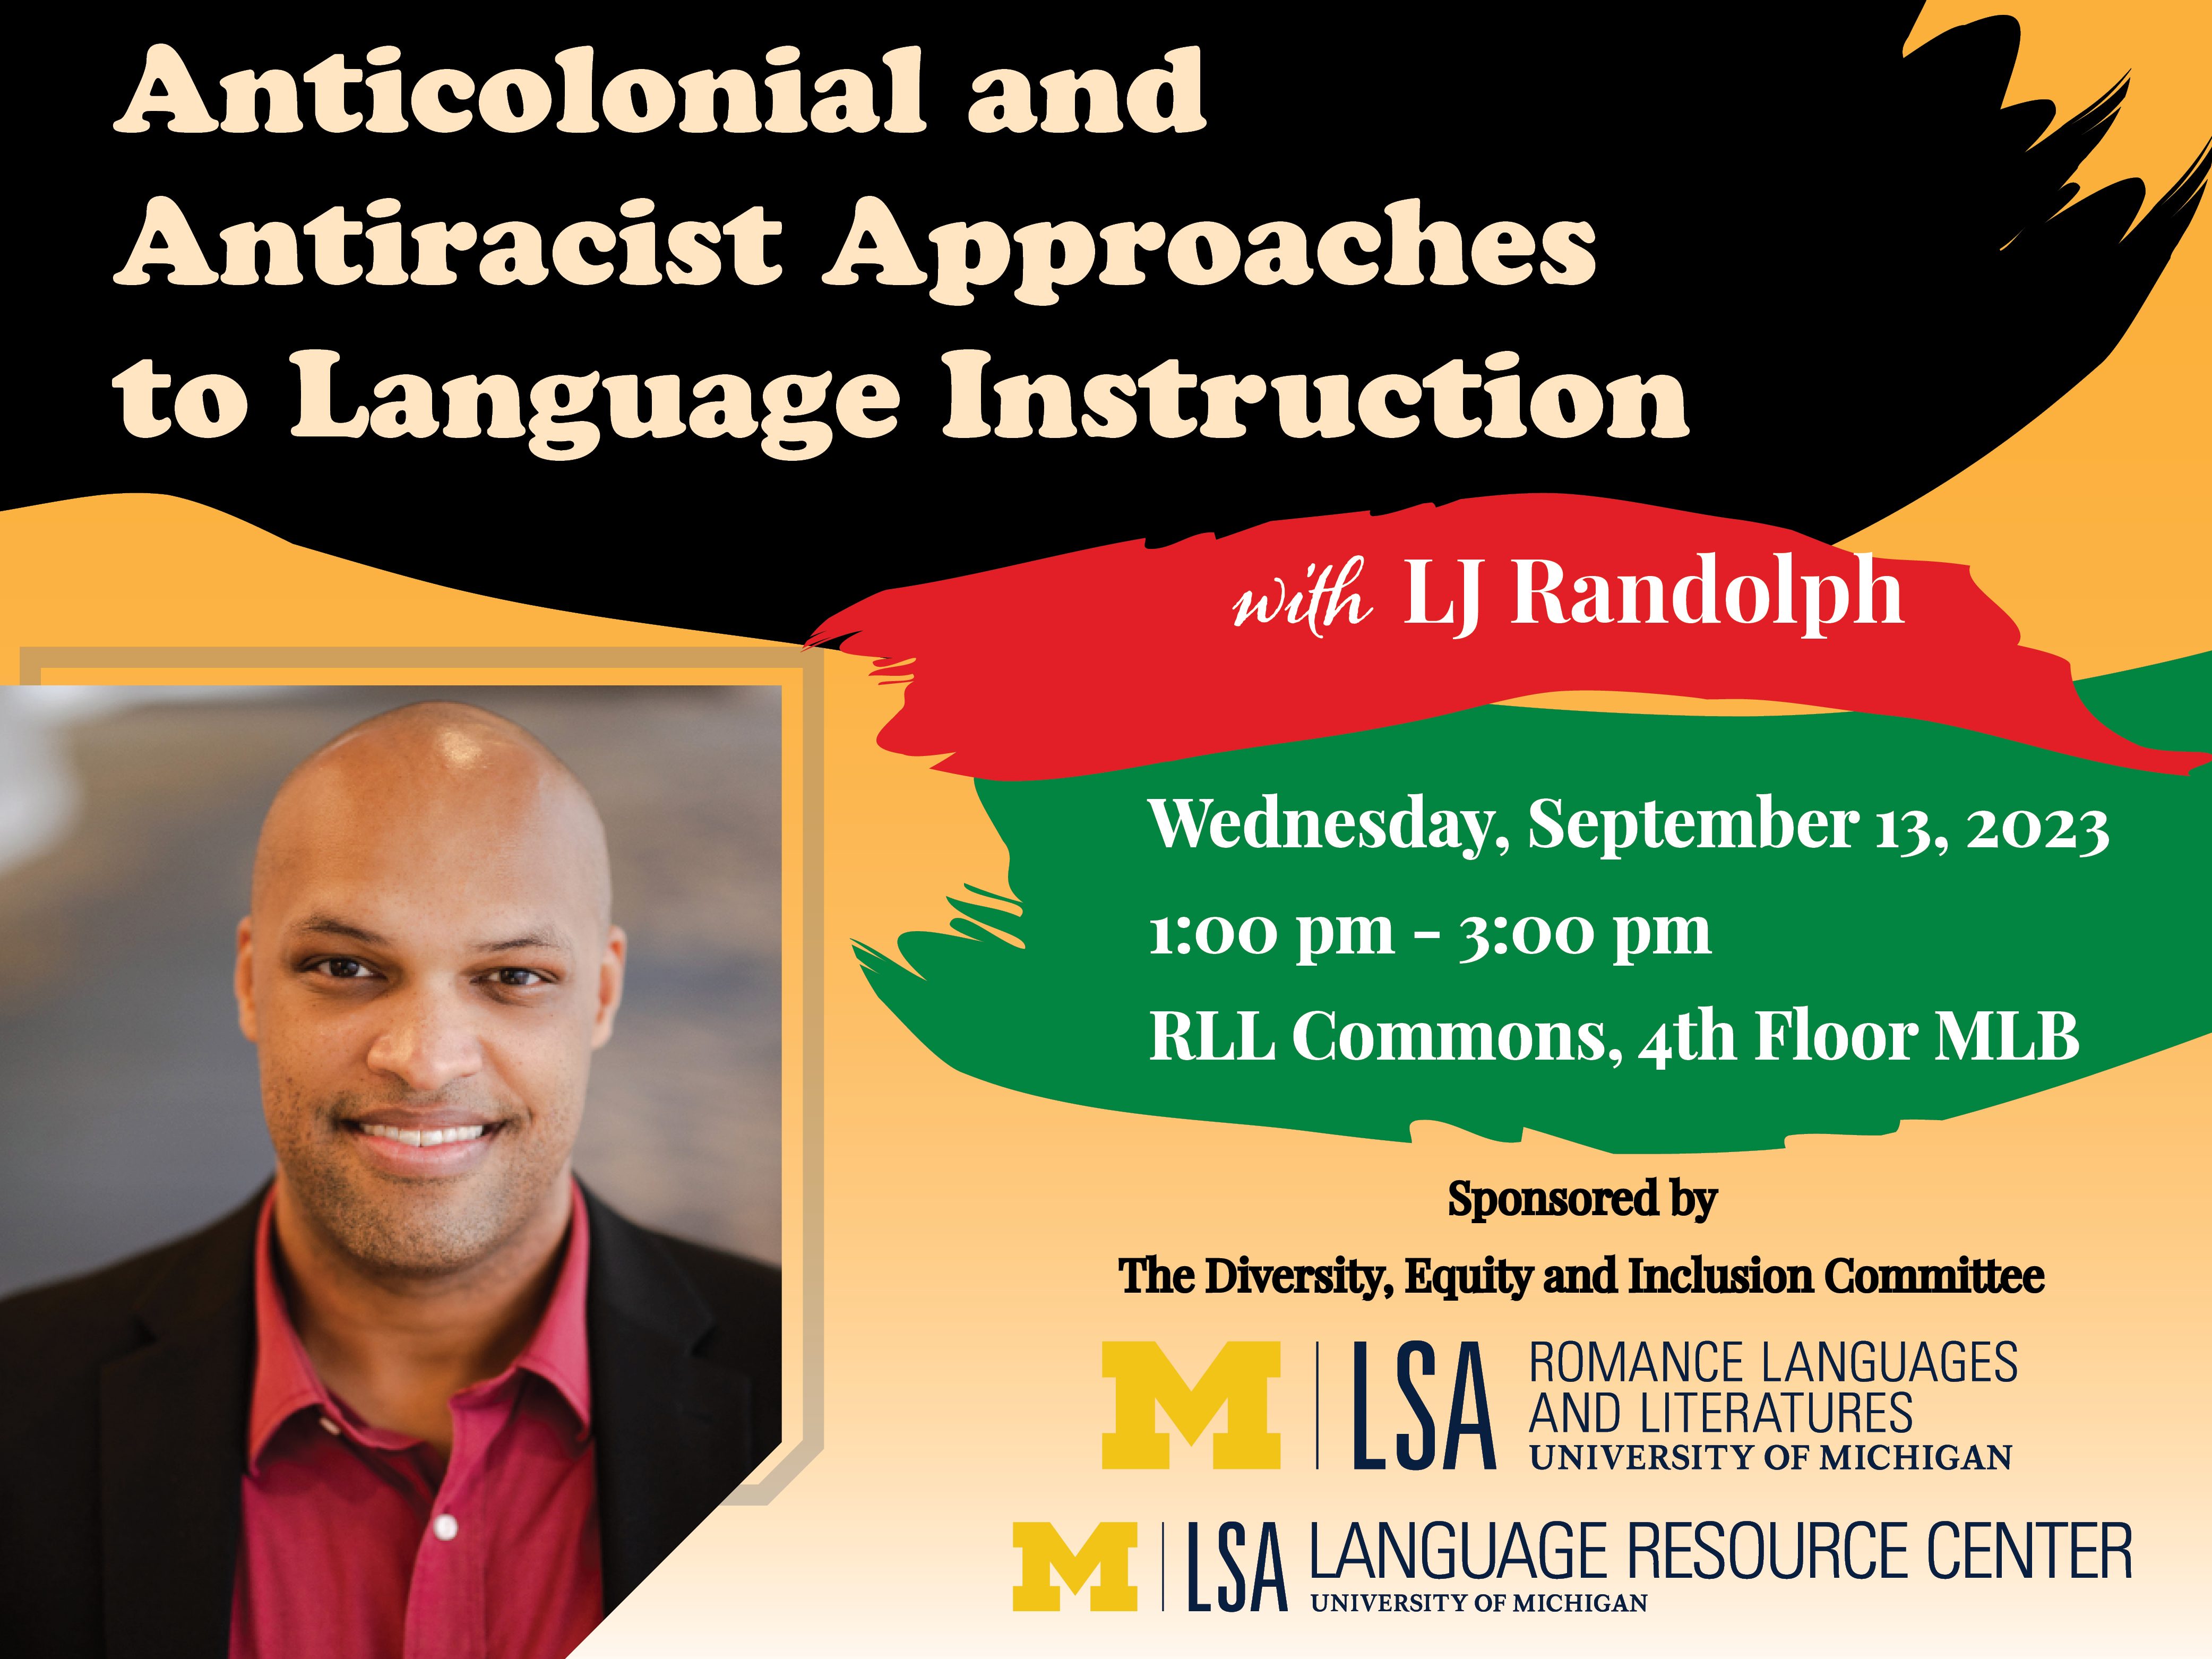 Event poster for Anticolonial and Antiracist Approaches to Language Instruction